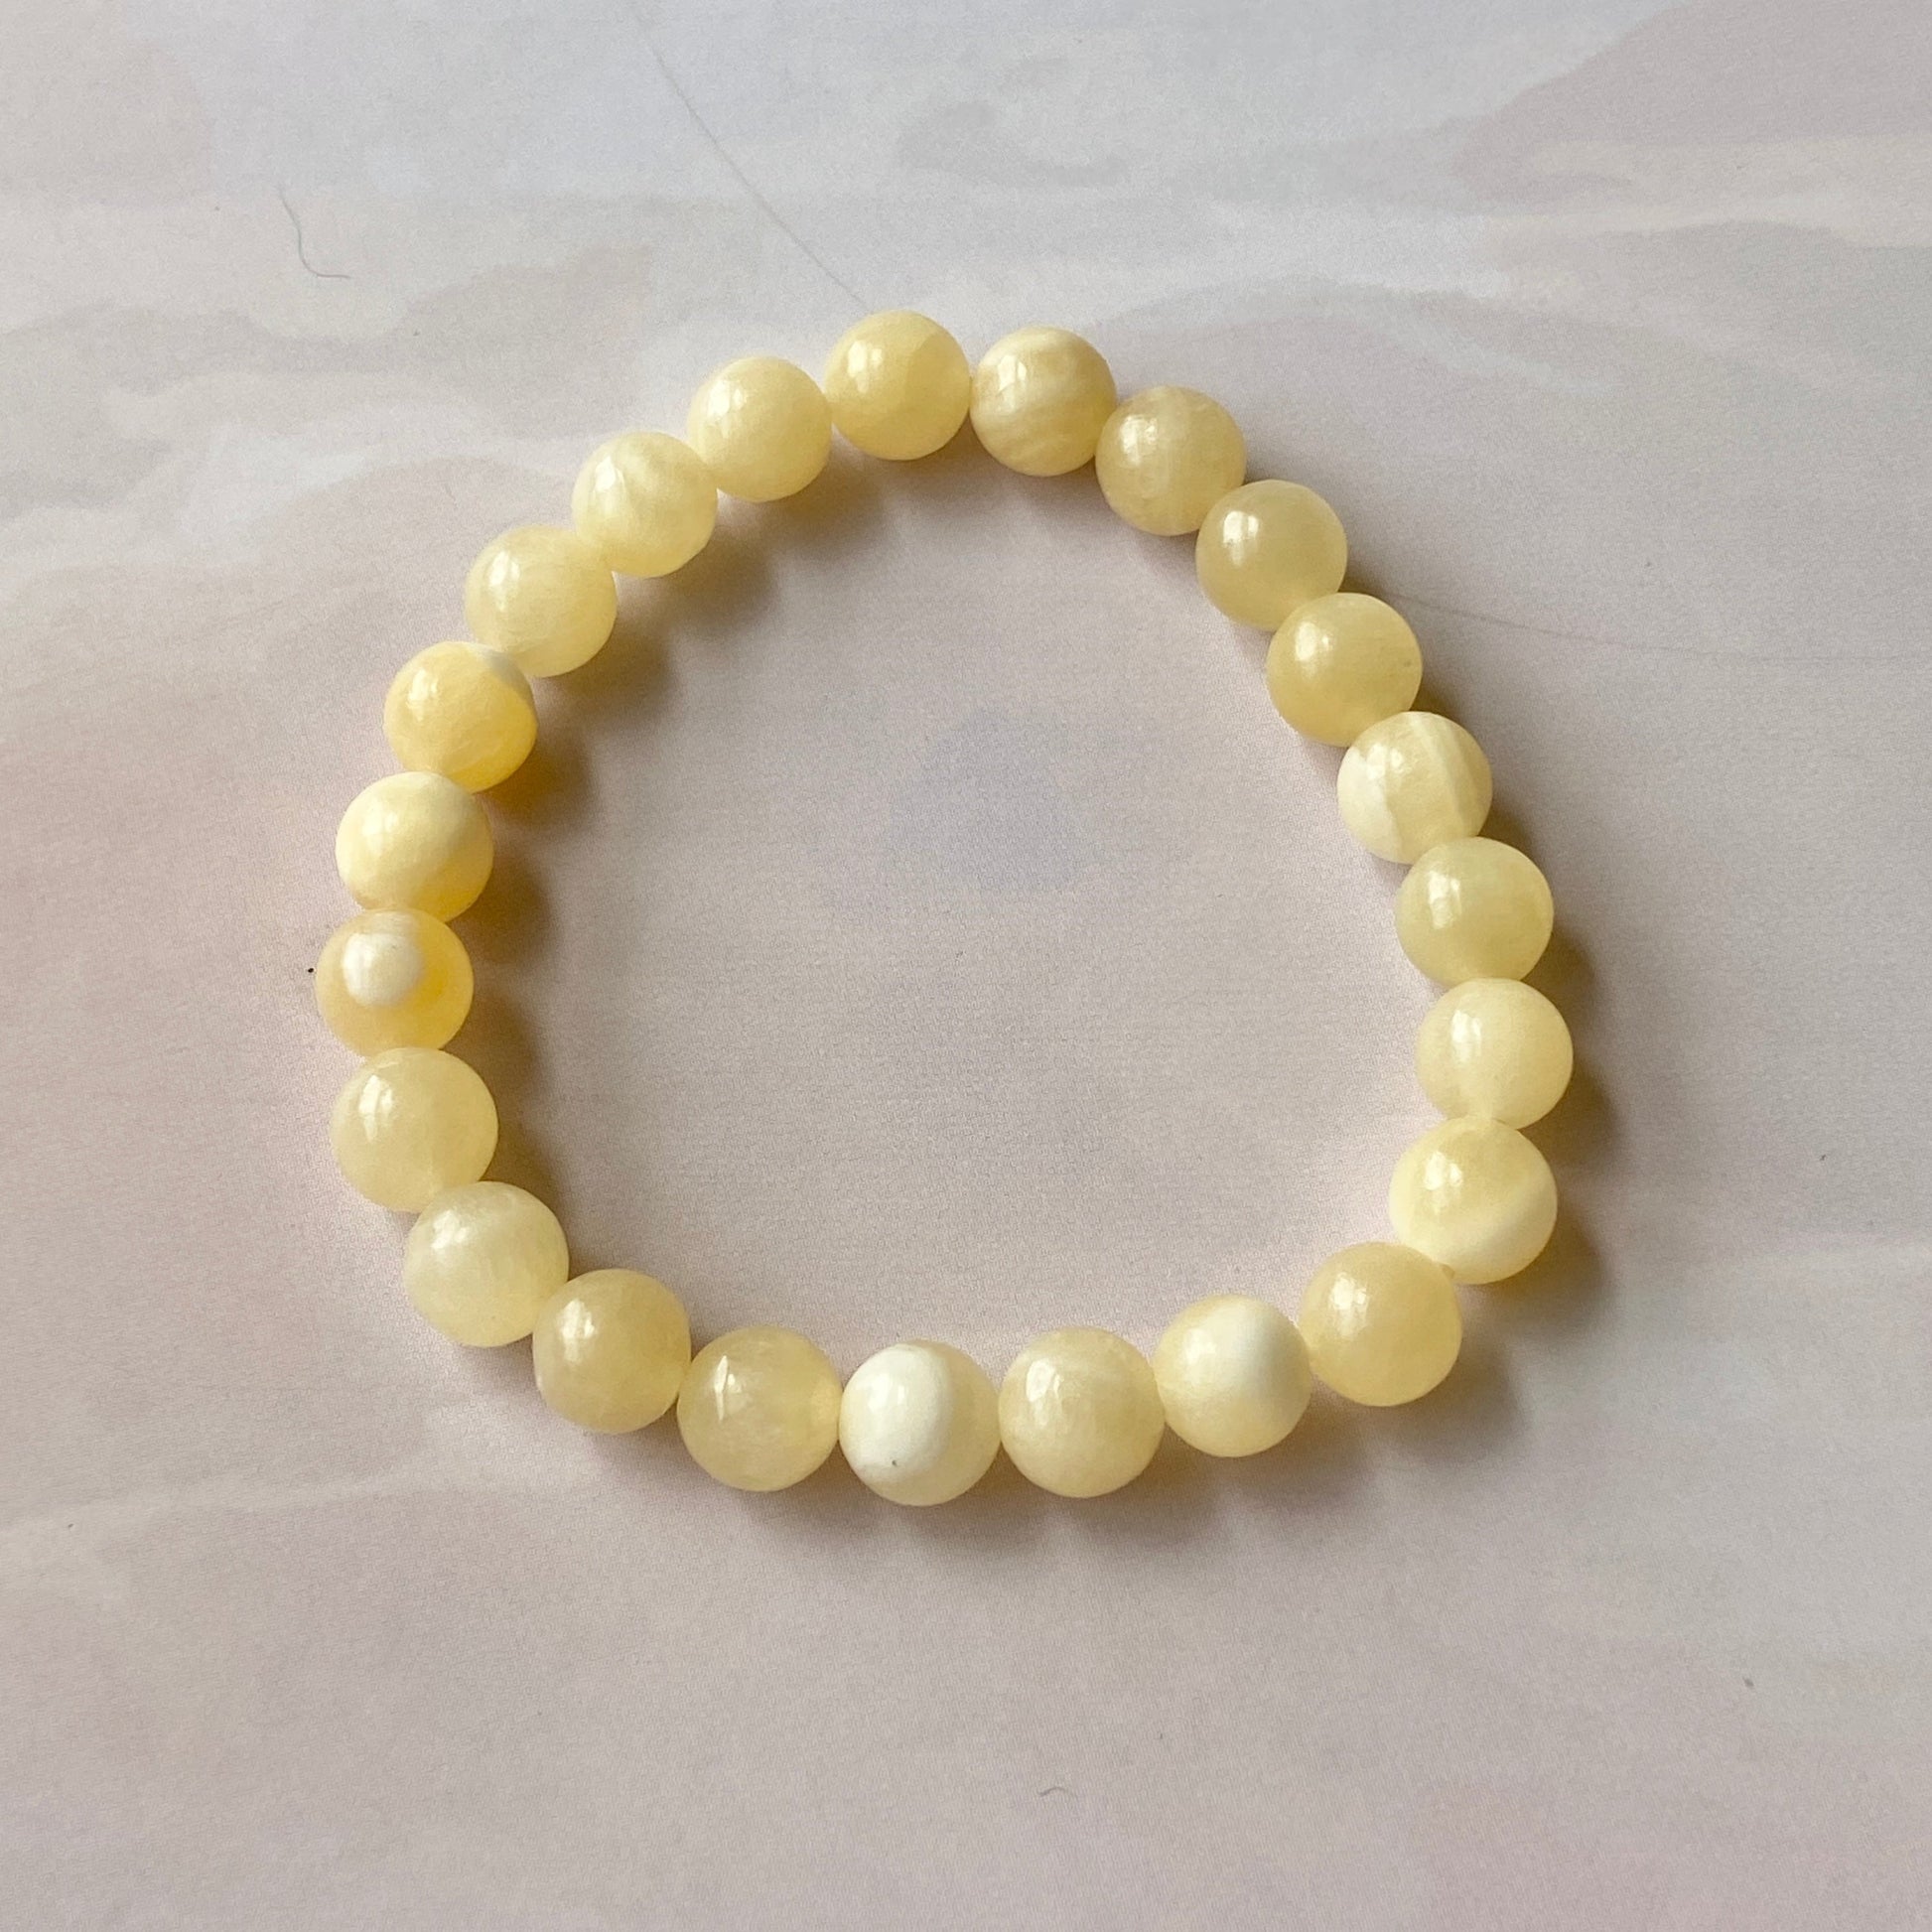 Yellow Calcite Bead Bracelet | Connect With Spirit Guides Crystal & Stones